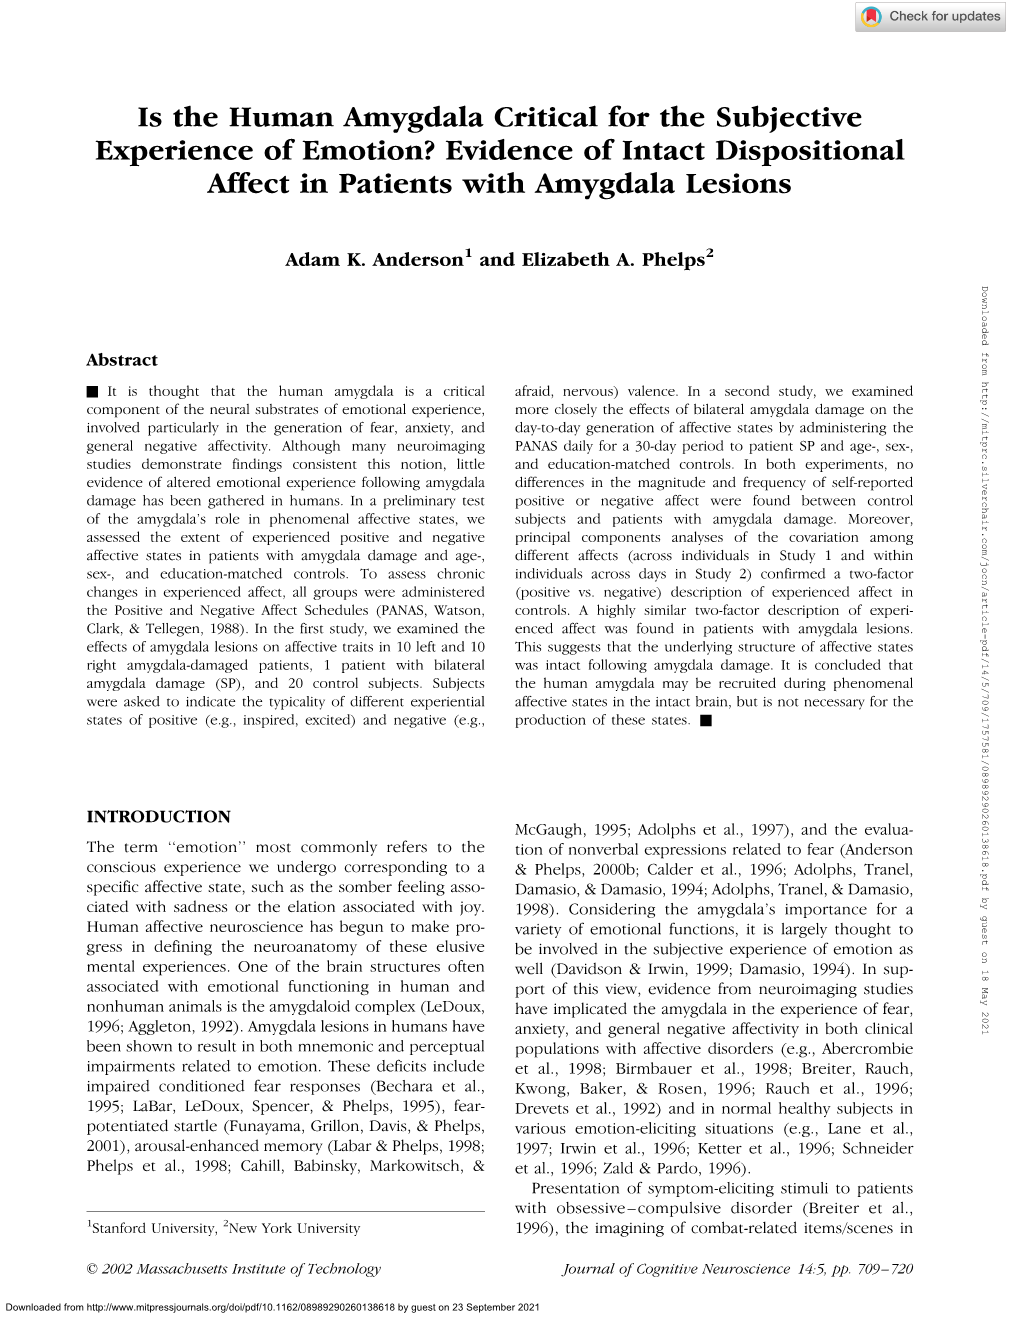 Evidence of Intact Dispositional Affect in Patients with Amygdala Lesions